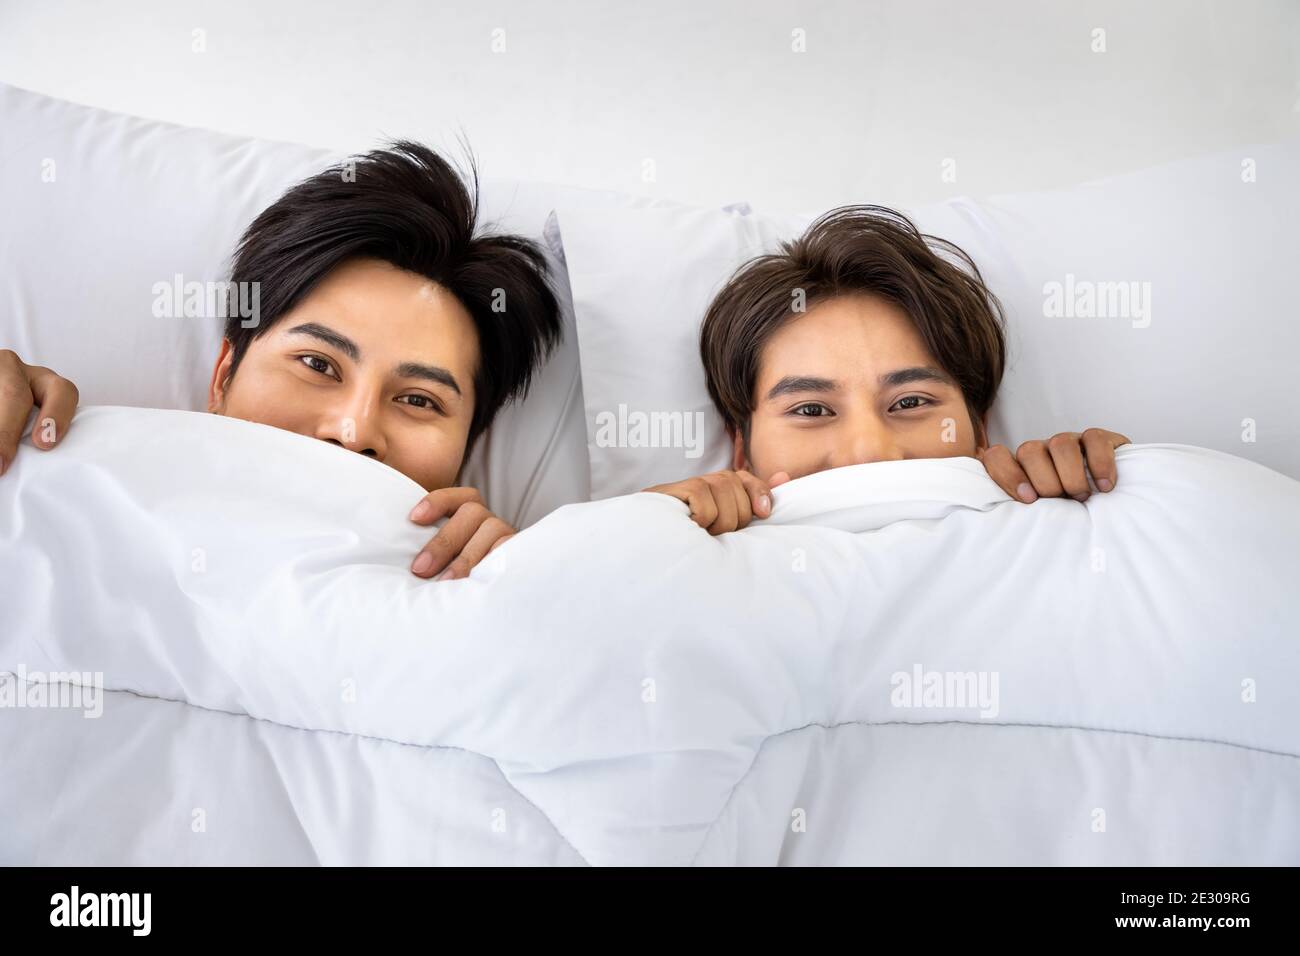 Happy Asian homosexual gay men male couple hiding under blanket in bed together. LGBT and sexual diversity concept. Looking at camera. Stock Photo